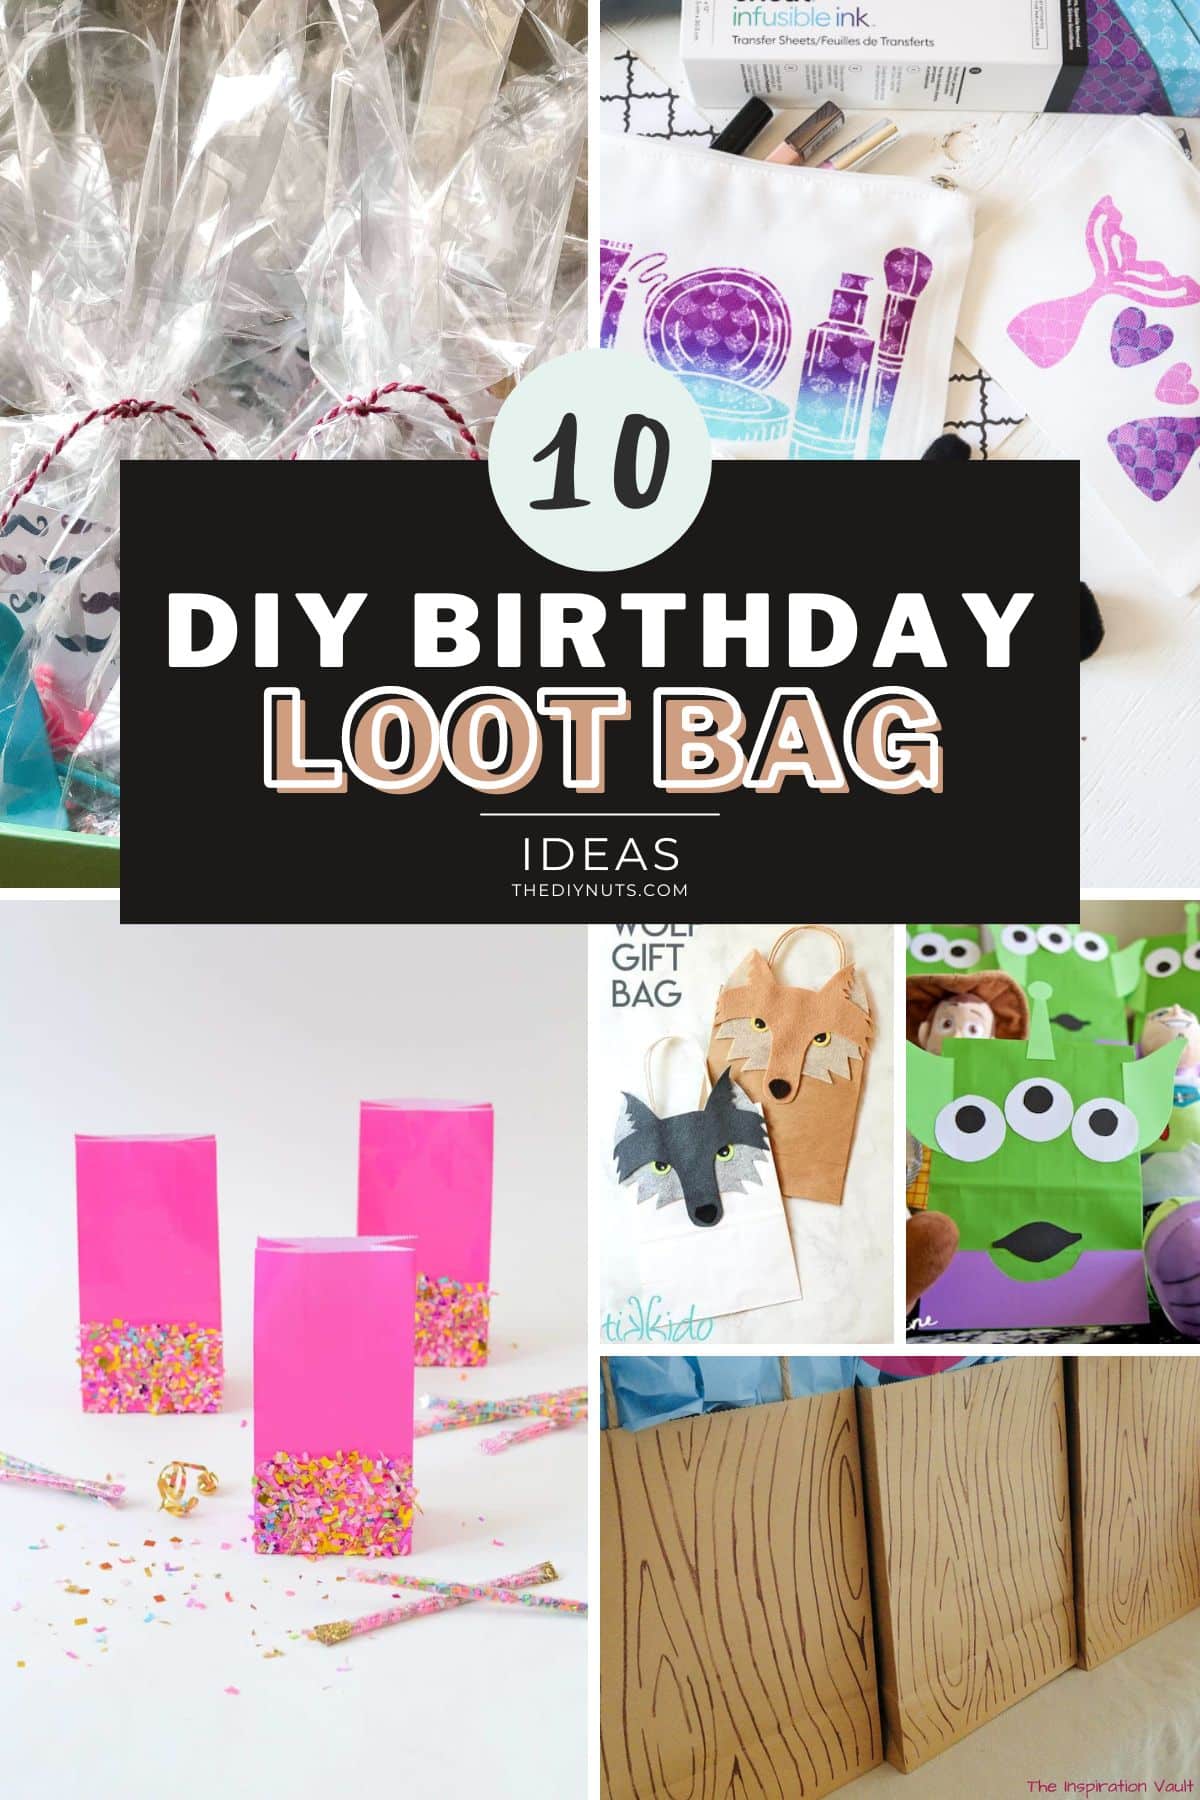 collage of birthday goodie bags with text 10 DIY birthday loot bag ideas.